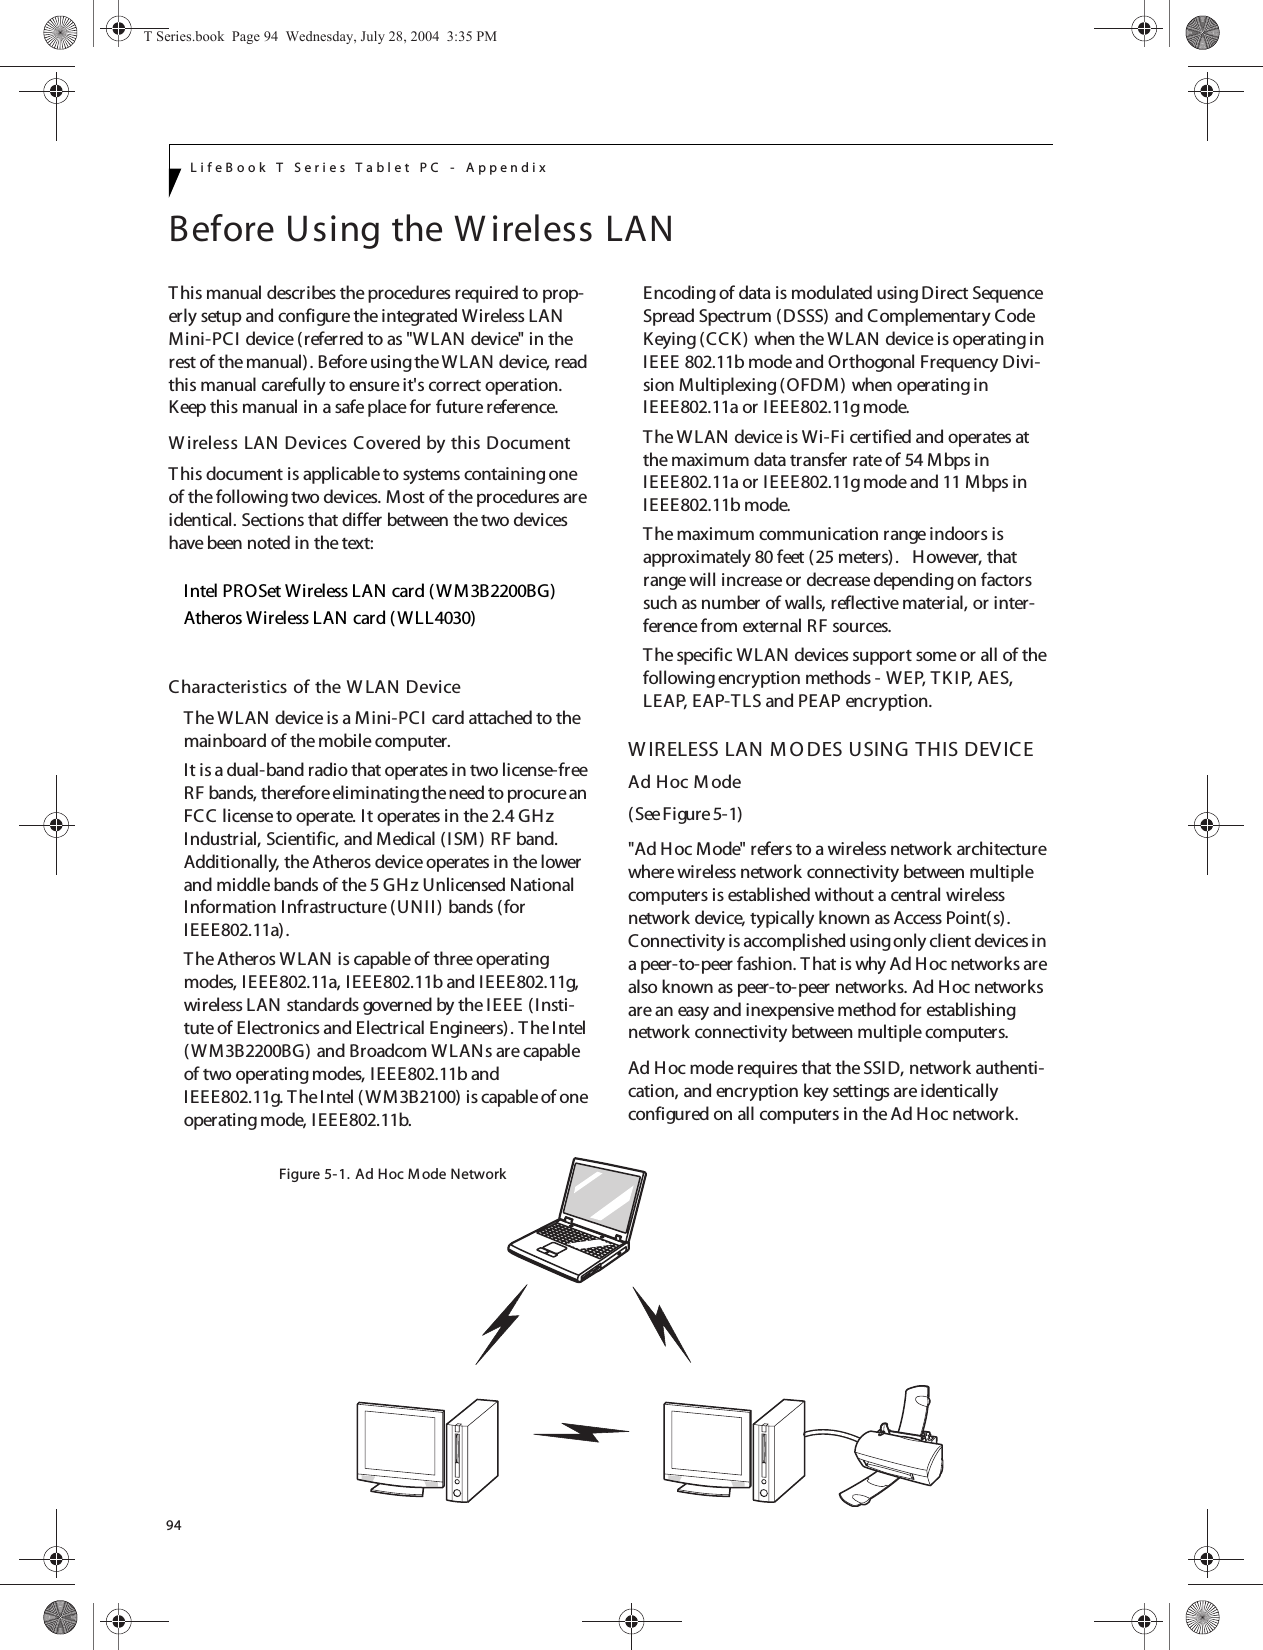 94LifeBook T Series Tablet PC - AppendixBefore Using the W ireless LANThis manual describes the procedures required to prop-erly setup and configure the integrated Wireless LAN Mini-PCI device (referred to as &quot;WLAN device&quot; in the rest of the manual). Before using the WLAN device, read this manual carefully to ensure it&apos;s correct operation. Keep this manual in a safe place for future reference.W ireless LAN Devices Covered by this DocumentThis document is applicable to systems containing one of the following two devices. Most of the procedures are identical. Sections that differ between the two devices have been noted in the text:Intel PROSet Wireless LAN card ( WM3B2200BG)Atheros Wireless LAN card (WLL4030)Characteristics of the W LAN DeviceThe WLAN device is a Mini-PCI card attached to the mainboard of the mobile computer. It is a dual-band radio that operates in two license-free RF bands, therefore eliminating the need to procure an FCC license to operate. It operates in the 2.4 GH z Industrial, Scientific, and Medical (ISM) RF band. Additionally, the Atheros device operates in the lower and middle bands of the 5 GH z Unlicensed National Information Infrastructure (UNII) bands (for IEEE802.11a). The Atheros WLAN is capable of three operating modes, IEEE802.11a, IEEE802.11b and IEEE802.11g, wireless LAN standards governed by the IEEE (Insti-tute of Electronics and Electrical Engineers). T he Intel (W M3B2200BG) and Broadcom WLANs are capable of two operating modes, IEEE802.11b and IEEE802.11g. T he Intel (WM3B2100) is capable of one operating mode, IEEE802.11b.Encoding of data is modulated using Direct Sequence Spread Spectrum (DSSS) and Complementary Code Keying (CCK ) when the W LAN device is operating in IEEE 802.11b mode and Orthogonal Frequency Divi-sion Multiplexing (OFDM) when operating in IEEE802.11a or IEEE802.11g mode. The WLAN device is Wi-Fi certified and operates at the maximum data transfer rate of 54 Mbps in IEEE802.11a or IEEE802.11g mode and 11 Mbps in IEEE802.11b mode.The maximum communication range indoors is approximately 80 feet (25 meters).   However, that range will increase or decrease depending on factors such as number of walls, reflective material, or inter-ference from external RF sources.The specific WLAN devices support some or all of the following encryption methods - WEP, TKIP, AES, LEAP, EAP-TLS and PEAP encryption.W IRELESS LAN M O DES USING THIS DEVICEAd Hoc M ode (See Figure 5-1)&quot;Ad Hoc Mode&quot; refers to a wireless network architecture where wireless network connectivity between multiple computers is established without a central wireless network device, typically known as Access Point(s). Connectivity is accomplished using only client devices in a peer-to-peer fashion. T hat is why Ad Hoc networks are also known as peer-to-peer networks. Ad Hoc networks are an easy and inexpensive method for establishing network connectivity between multiple computers.Ad Hoc mode requires that the SSID, network authenti-cation, and encryption key settings are identically configured on all computers in the Ad Hoc network. Figure 5-1. Ad Hoc M ode NetworkT Series.book  Page 94  Wednesday, July 28, 2004  3:35 PM